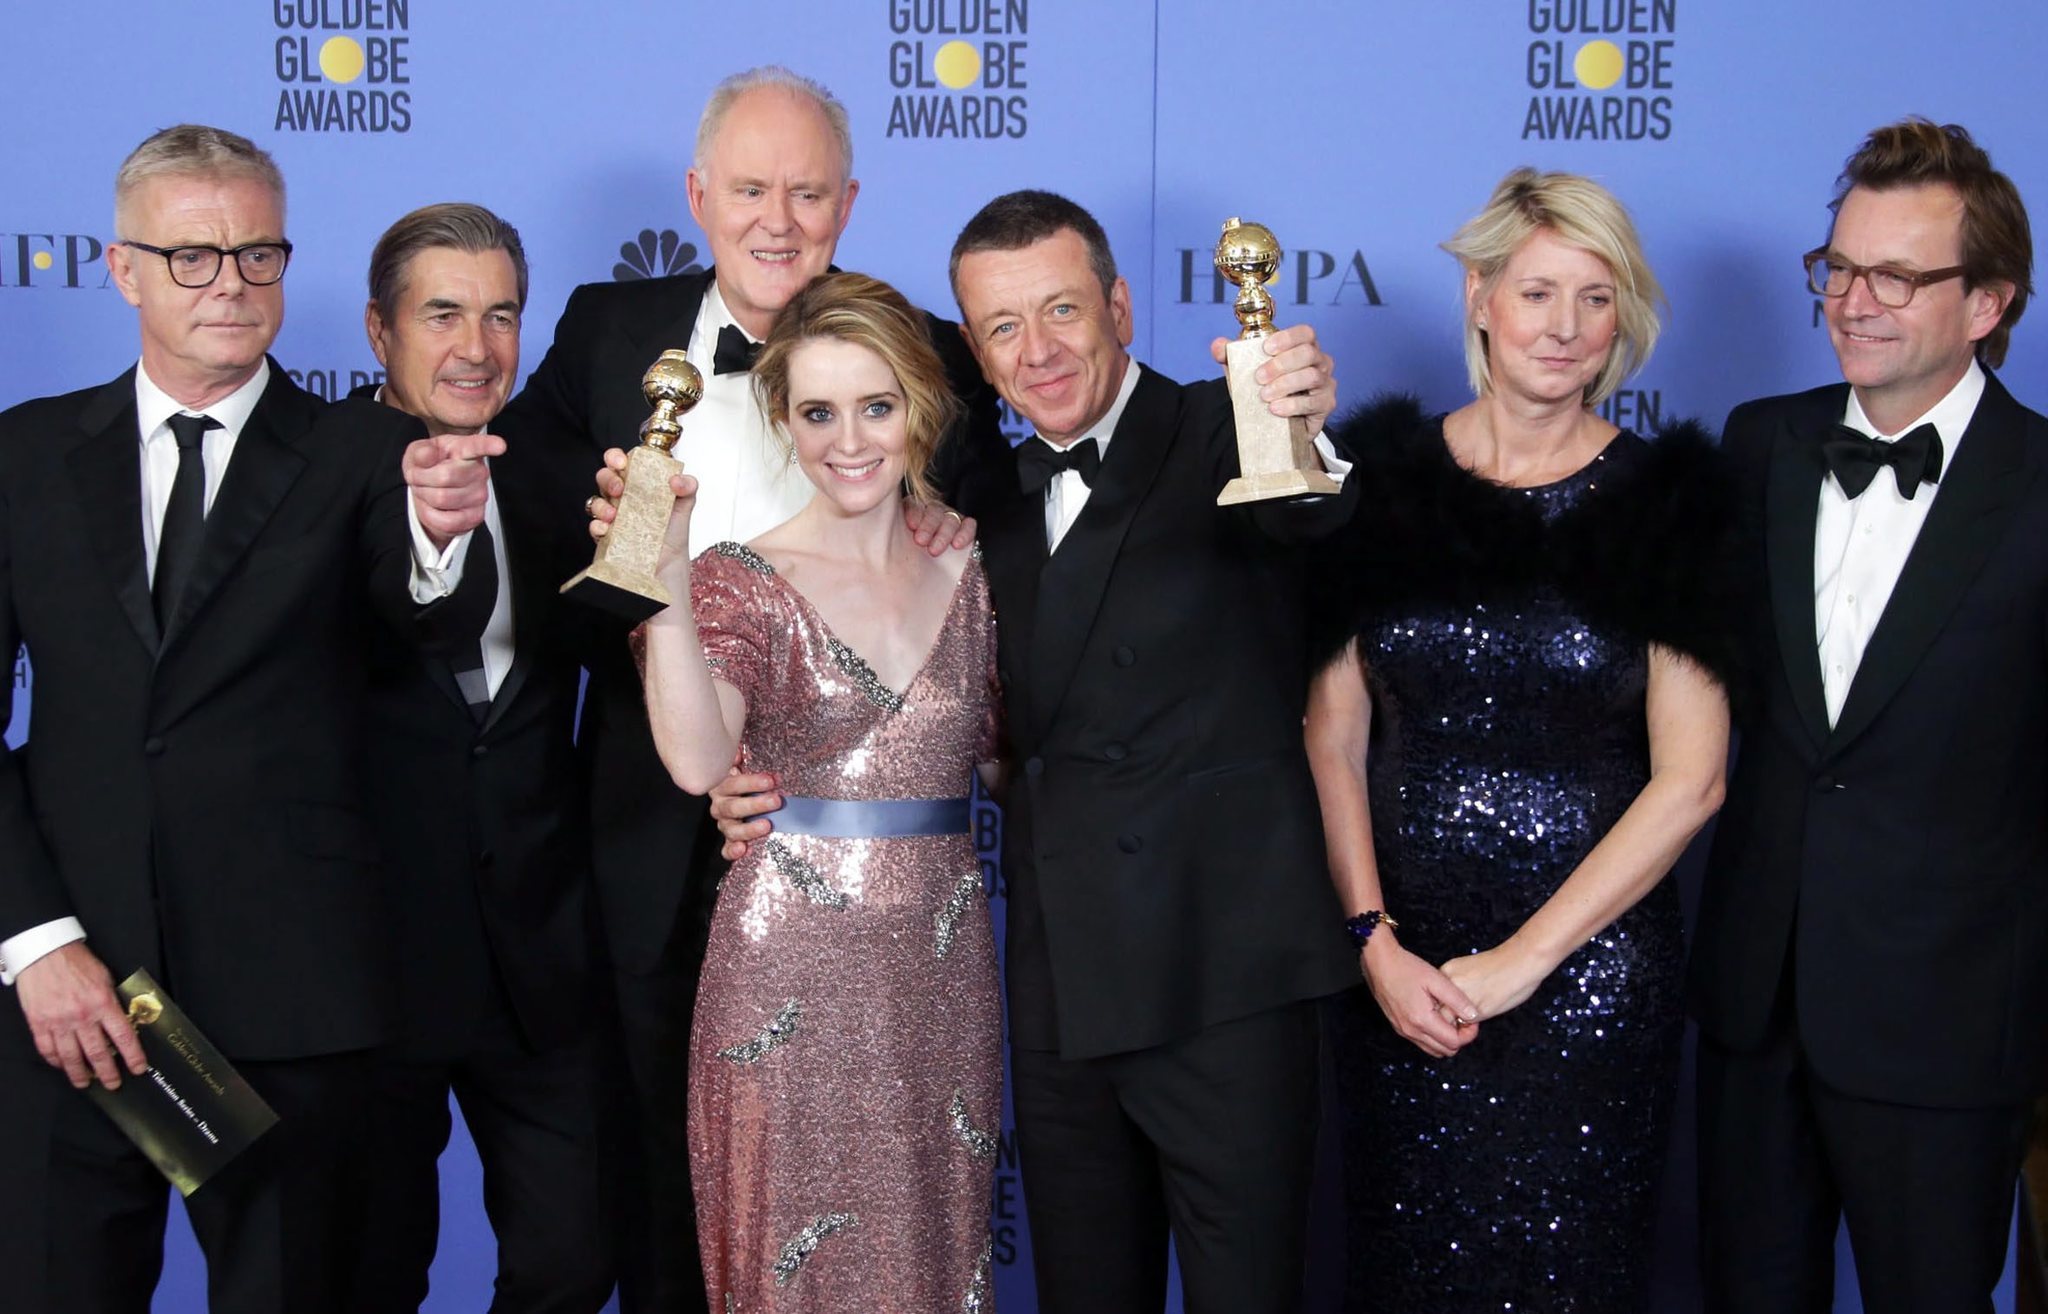 Winners at the 74th Golden Globes